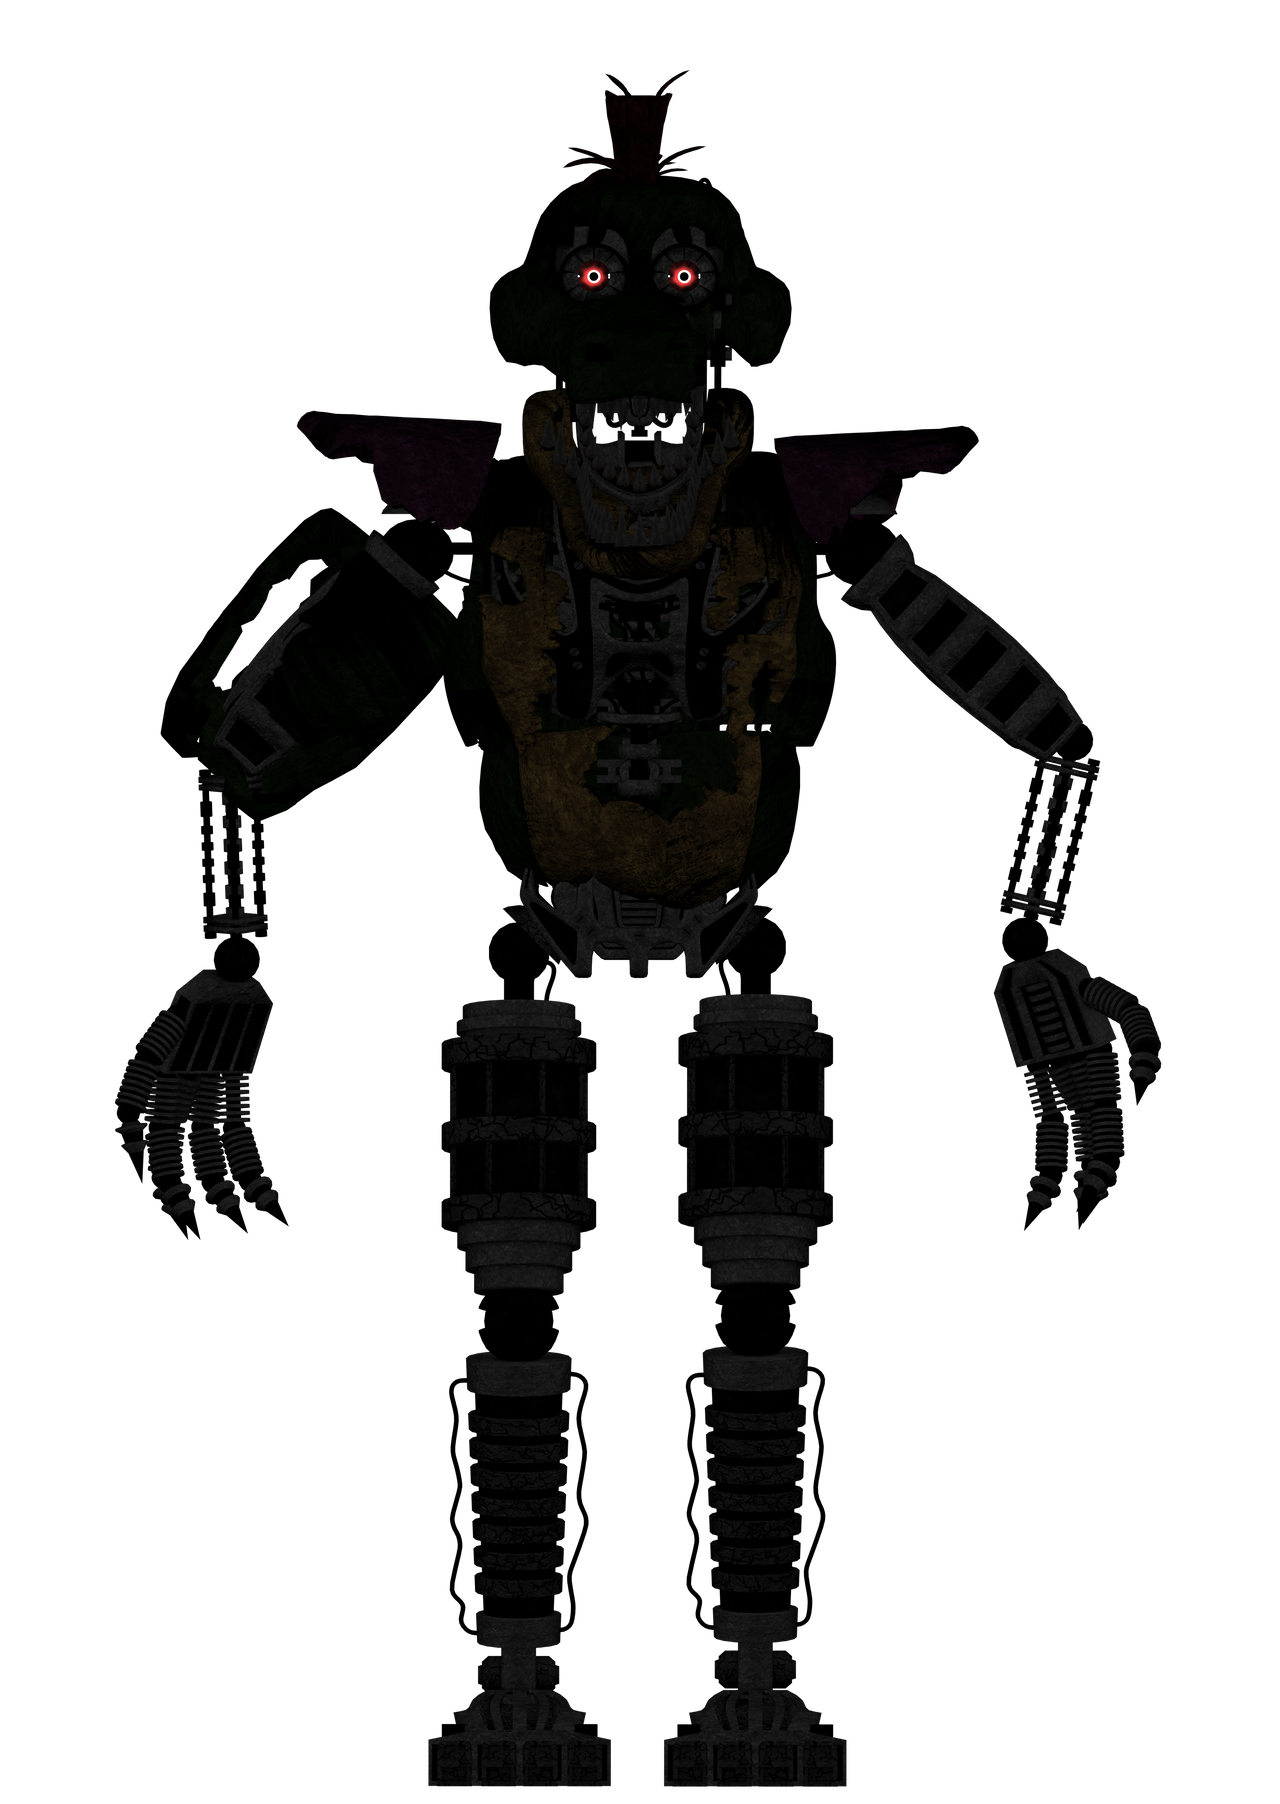 the Monty's [c4d/fnaf/sd] by Nightmarefred57 on DeviantArt